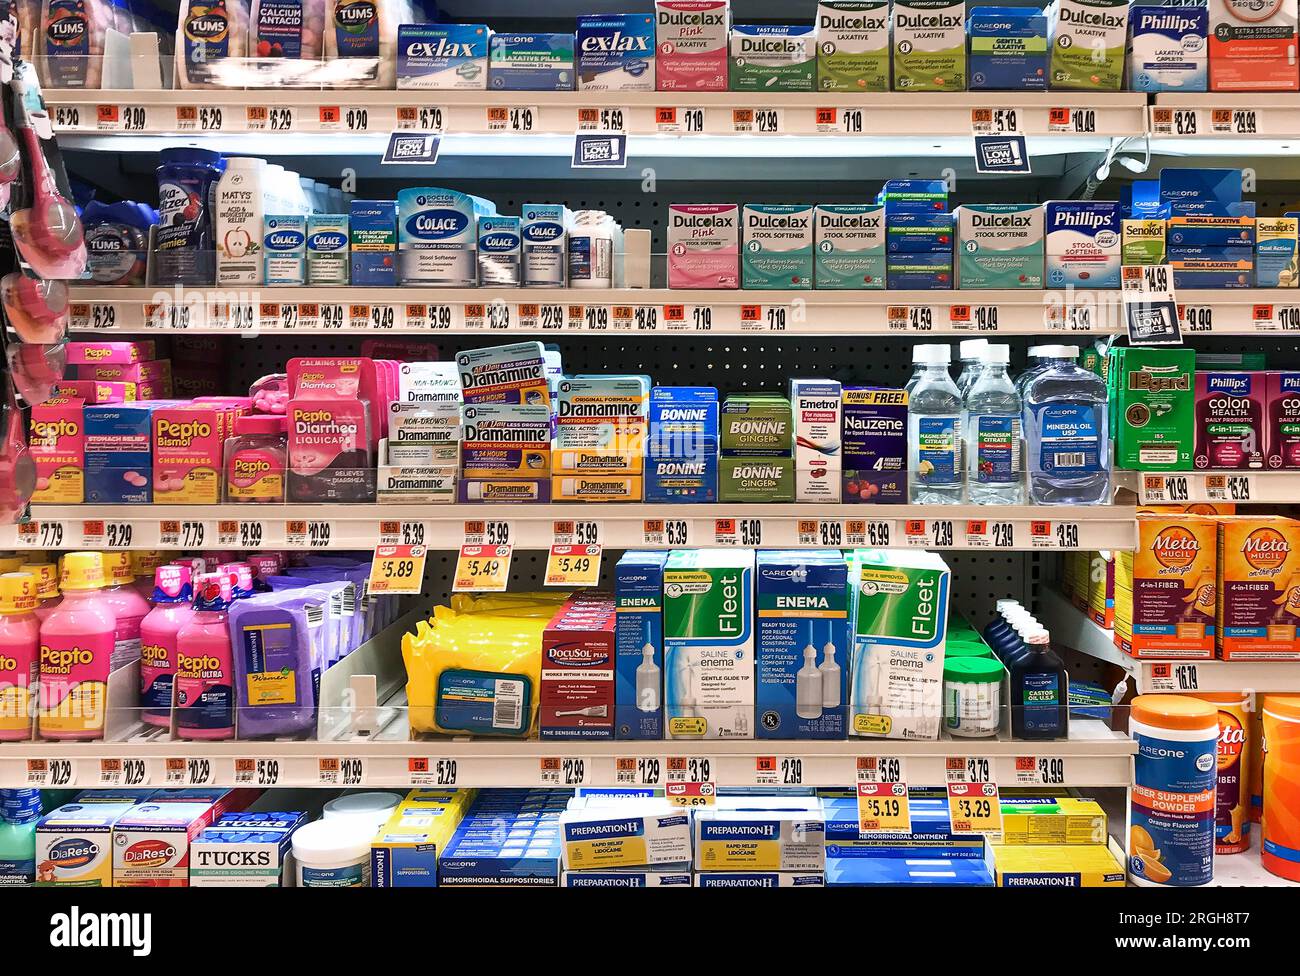 https://c8.alamy.com/comp/2RGH8T7/pharmacy-shelf-display-of-over-the-counter-medications-2RGH8T7.jpg